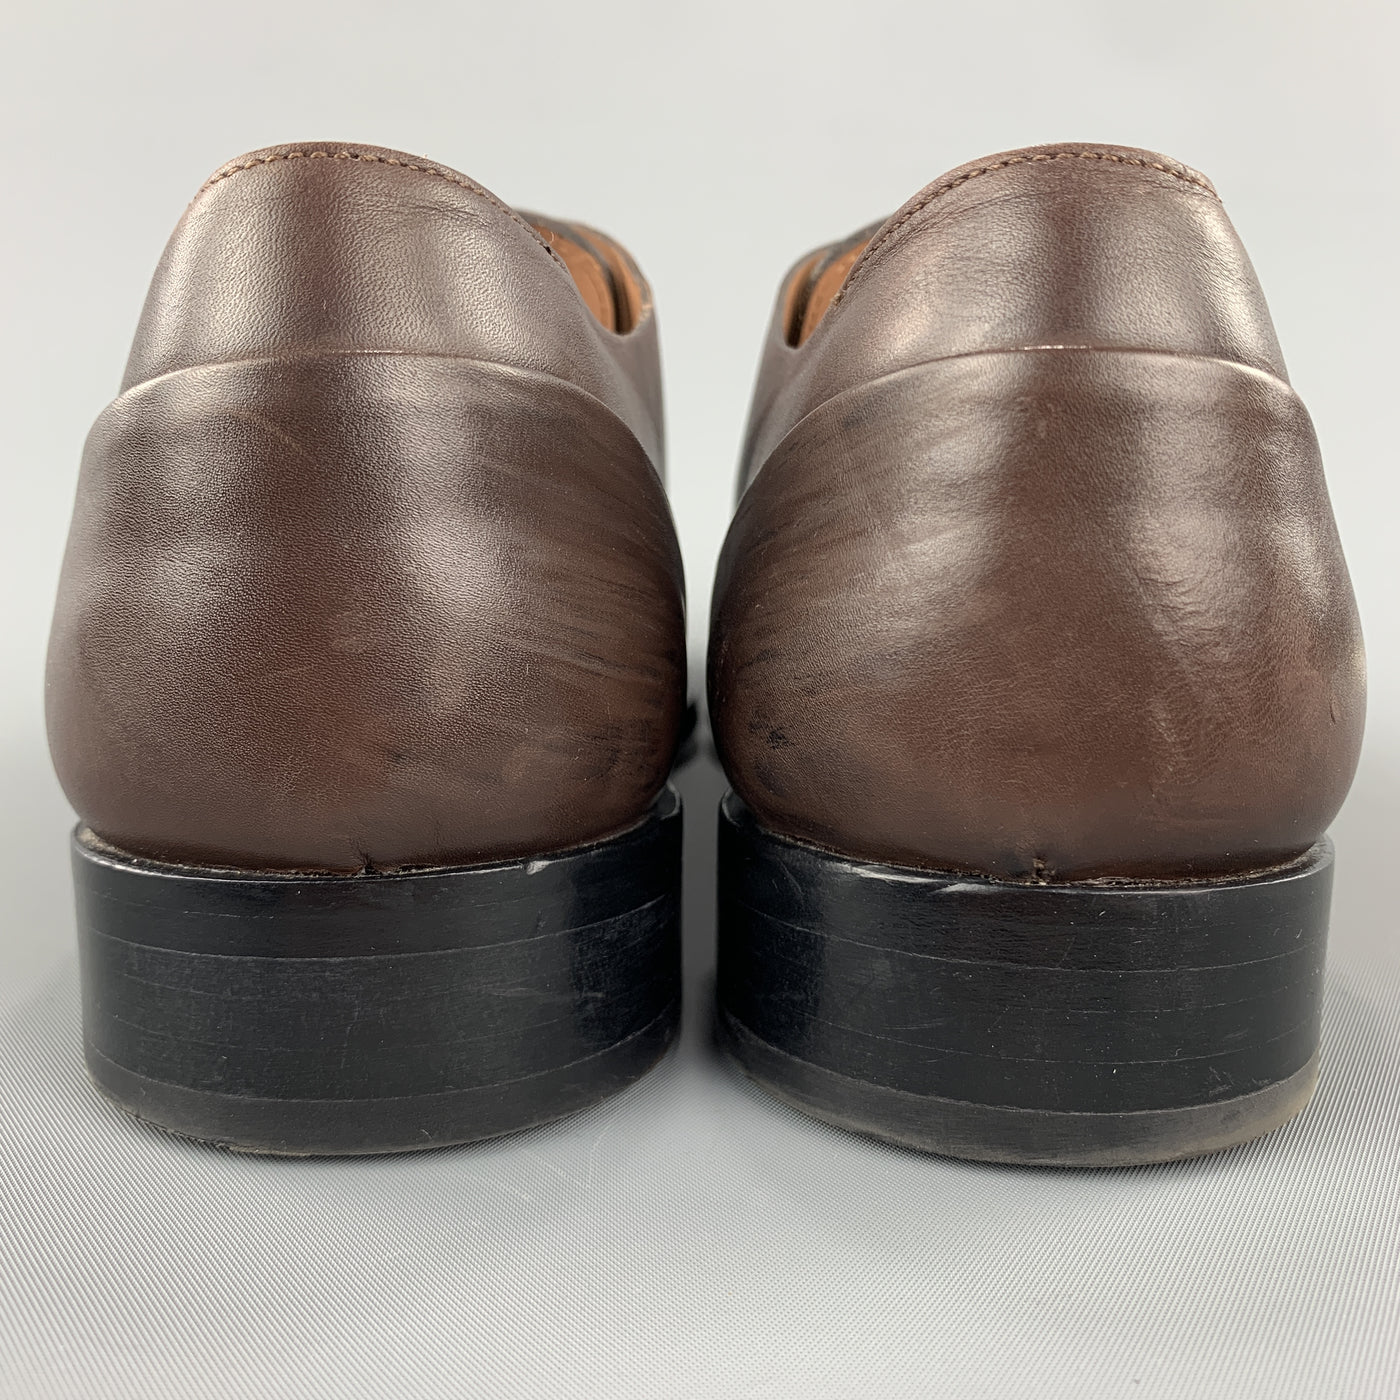 PAUL SMITH Size 9 Solid Brown Leather Lace Up Shoes